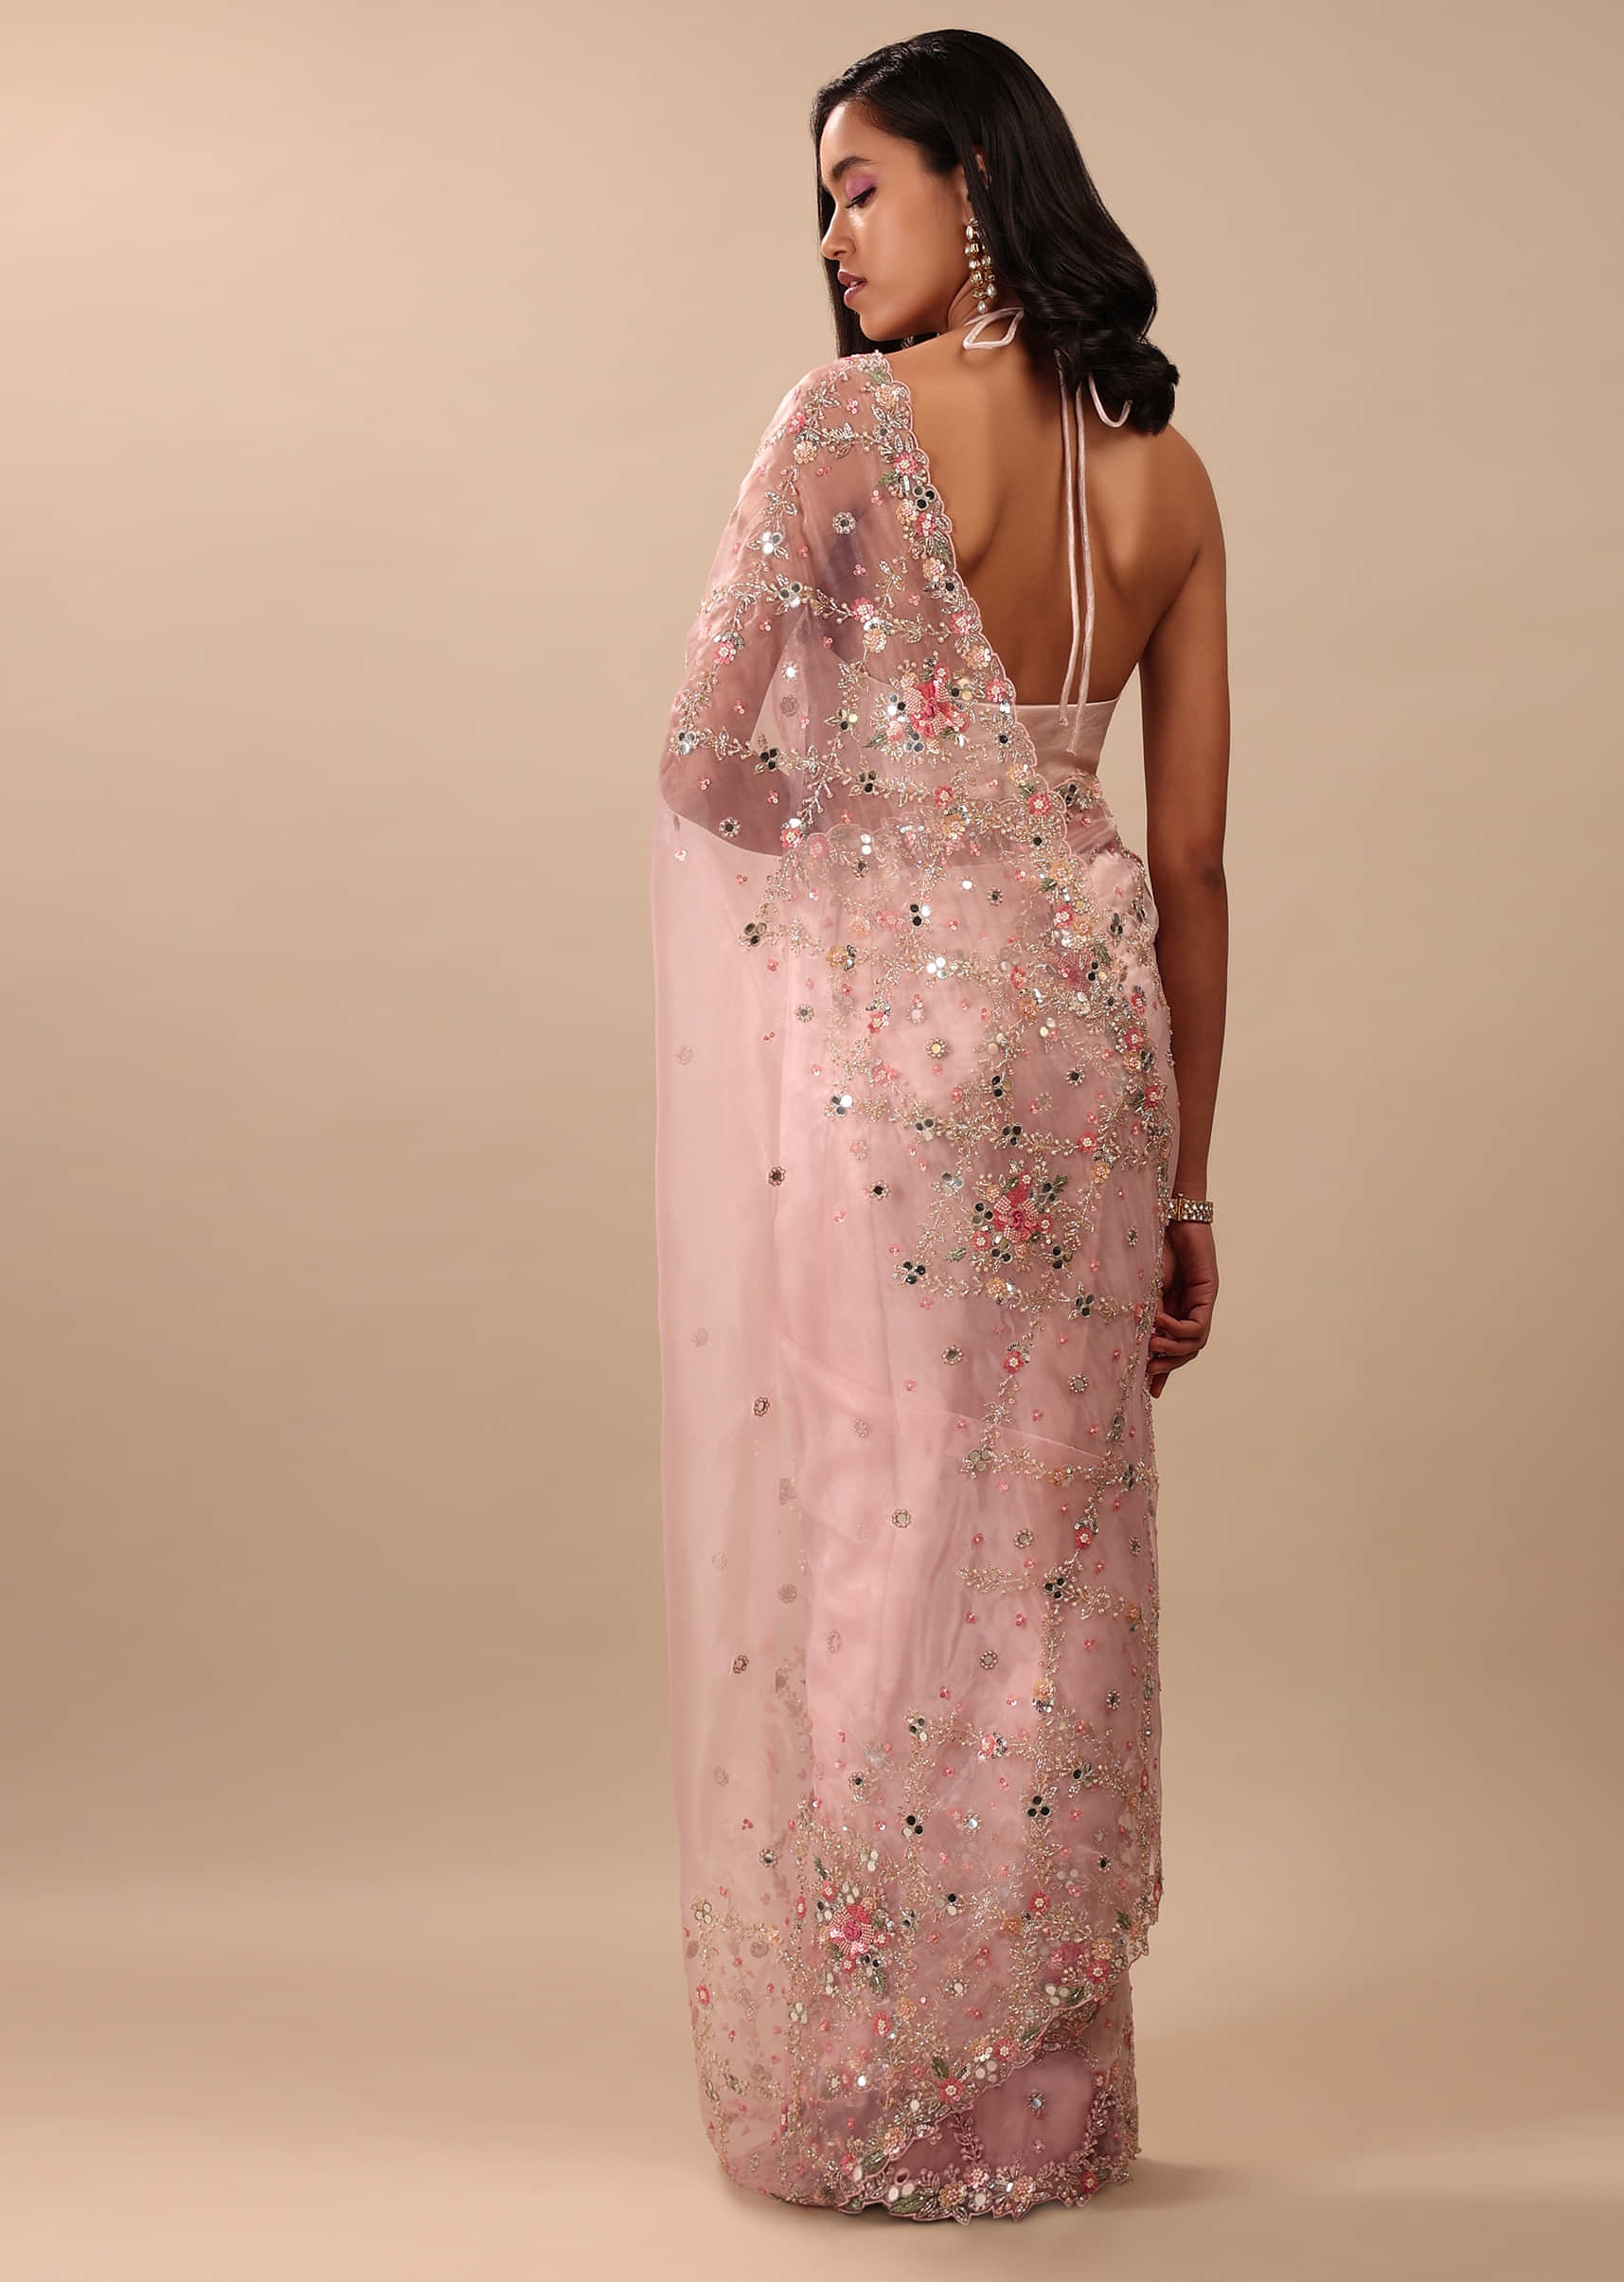 Blush Pink Saree In Organza With Floral & Mirror Embroidery